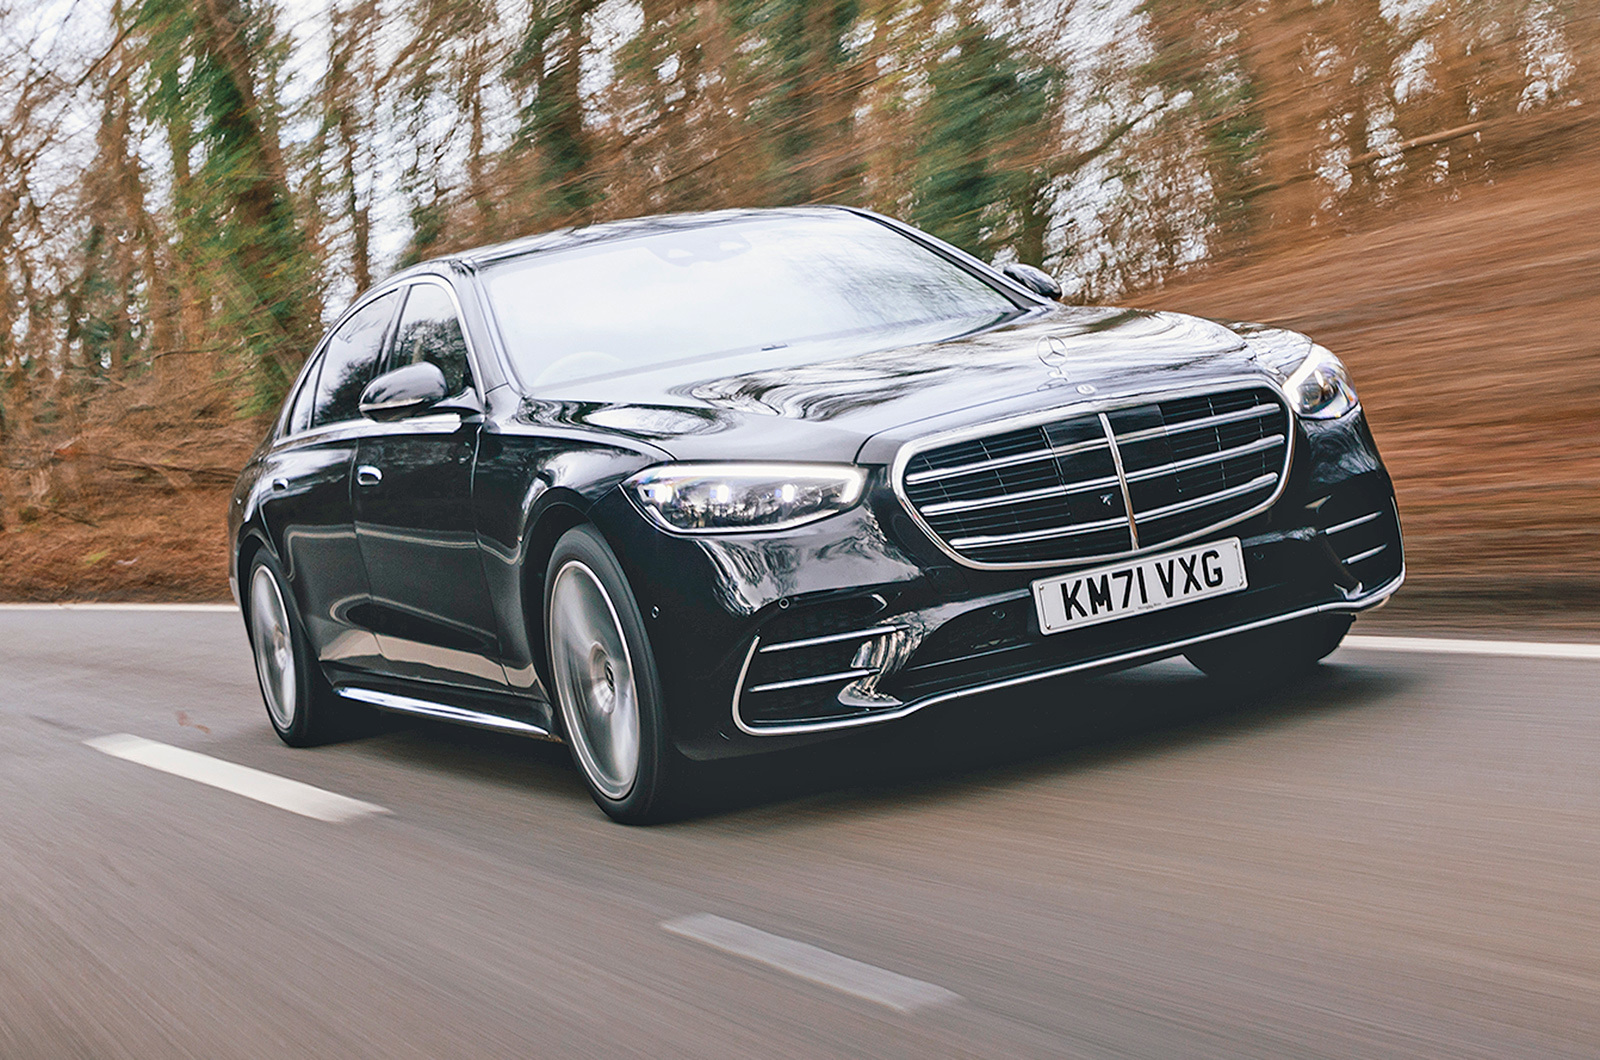 The Mercedes S-Class story: best car in the world?